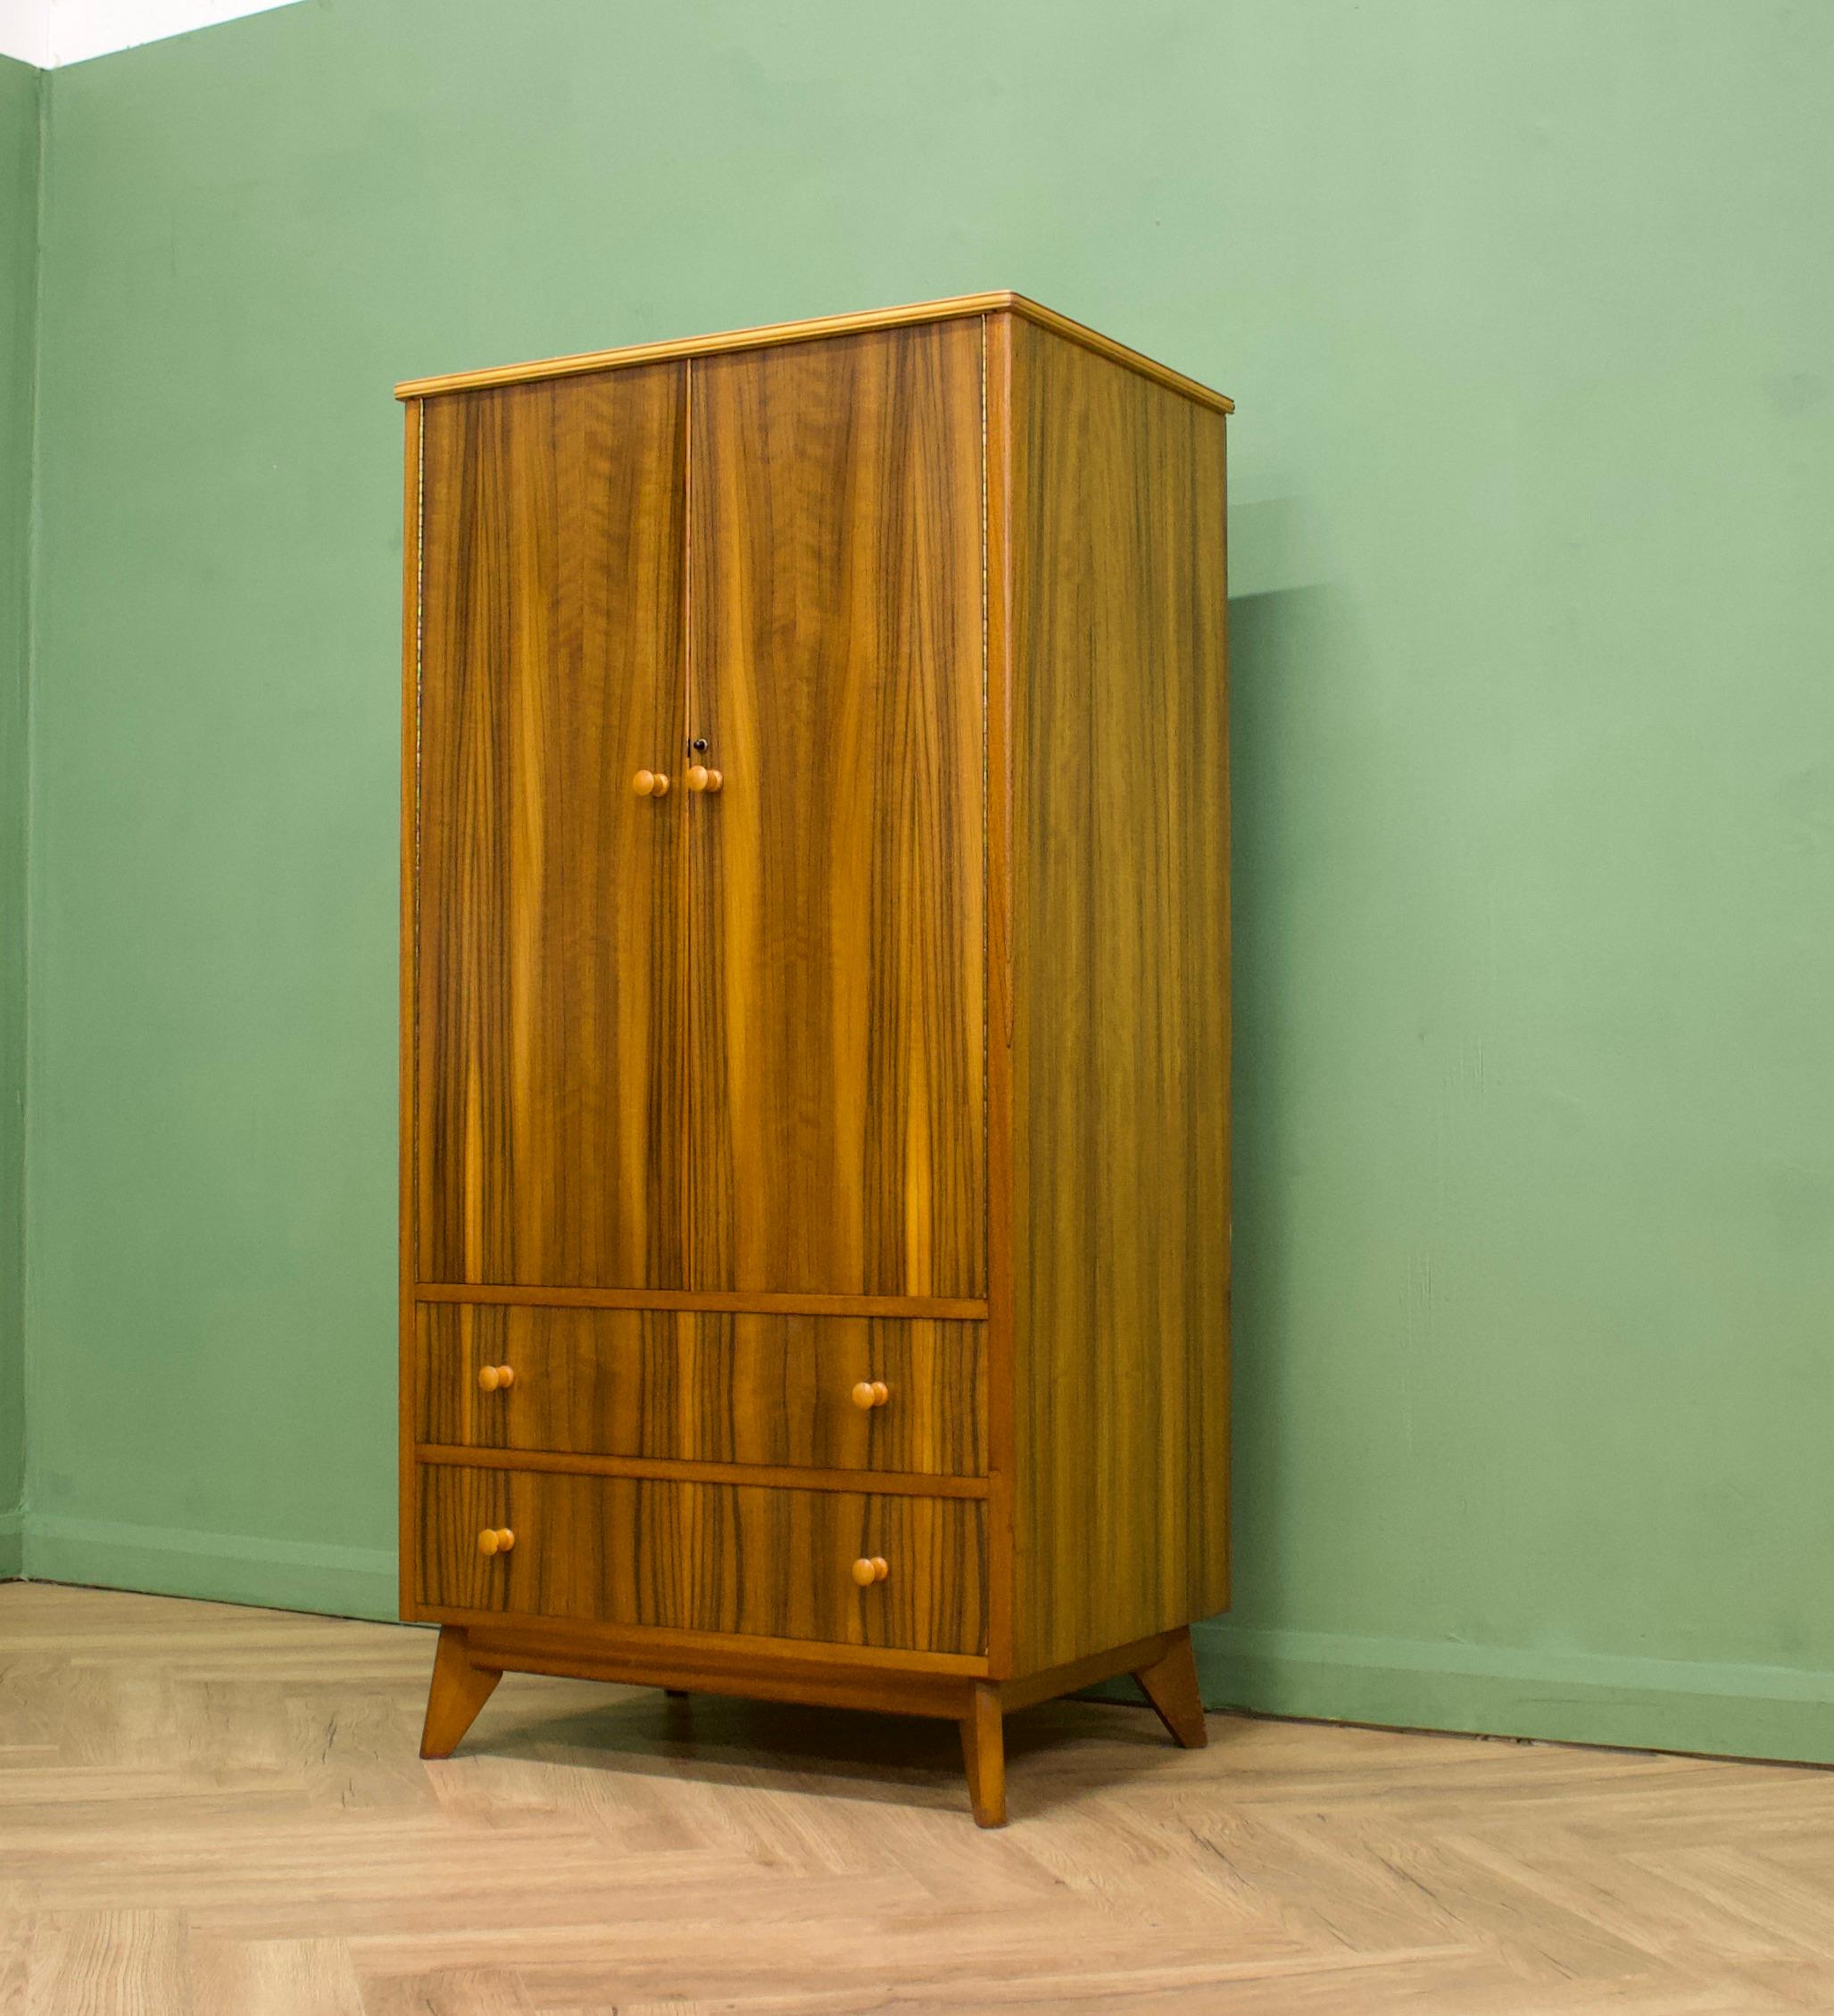 British Midcentury Vintage Compact Walnut Wardrobe from Morris of Glasgow, 1950s For Sale